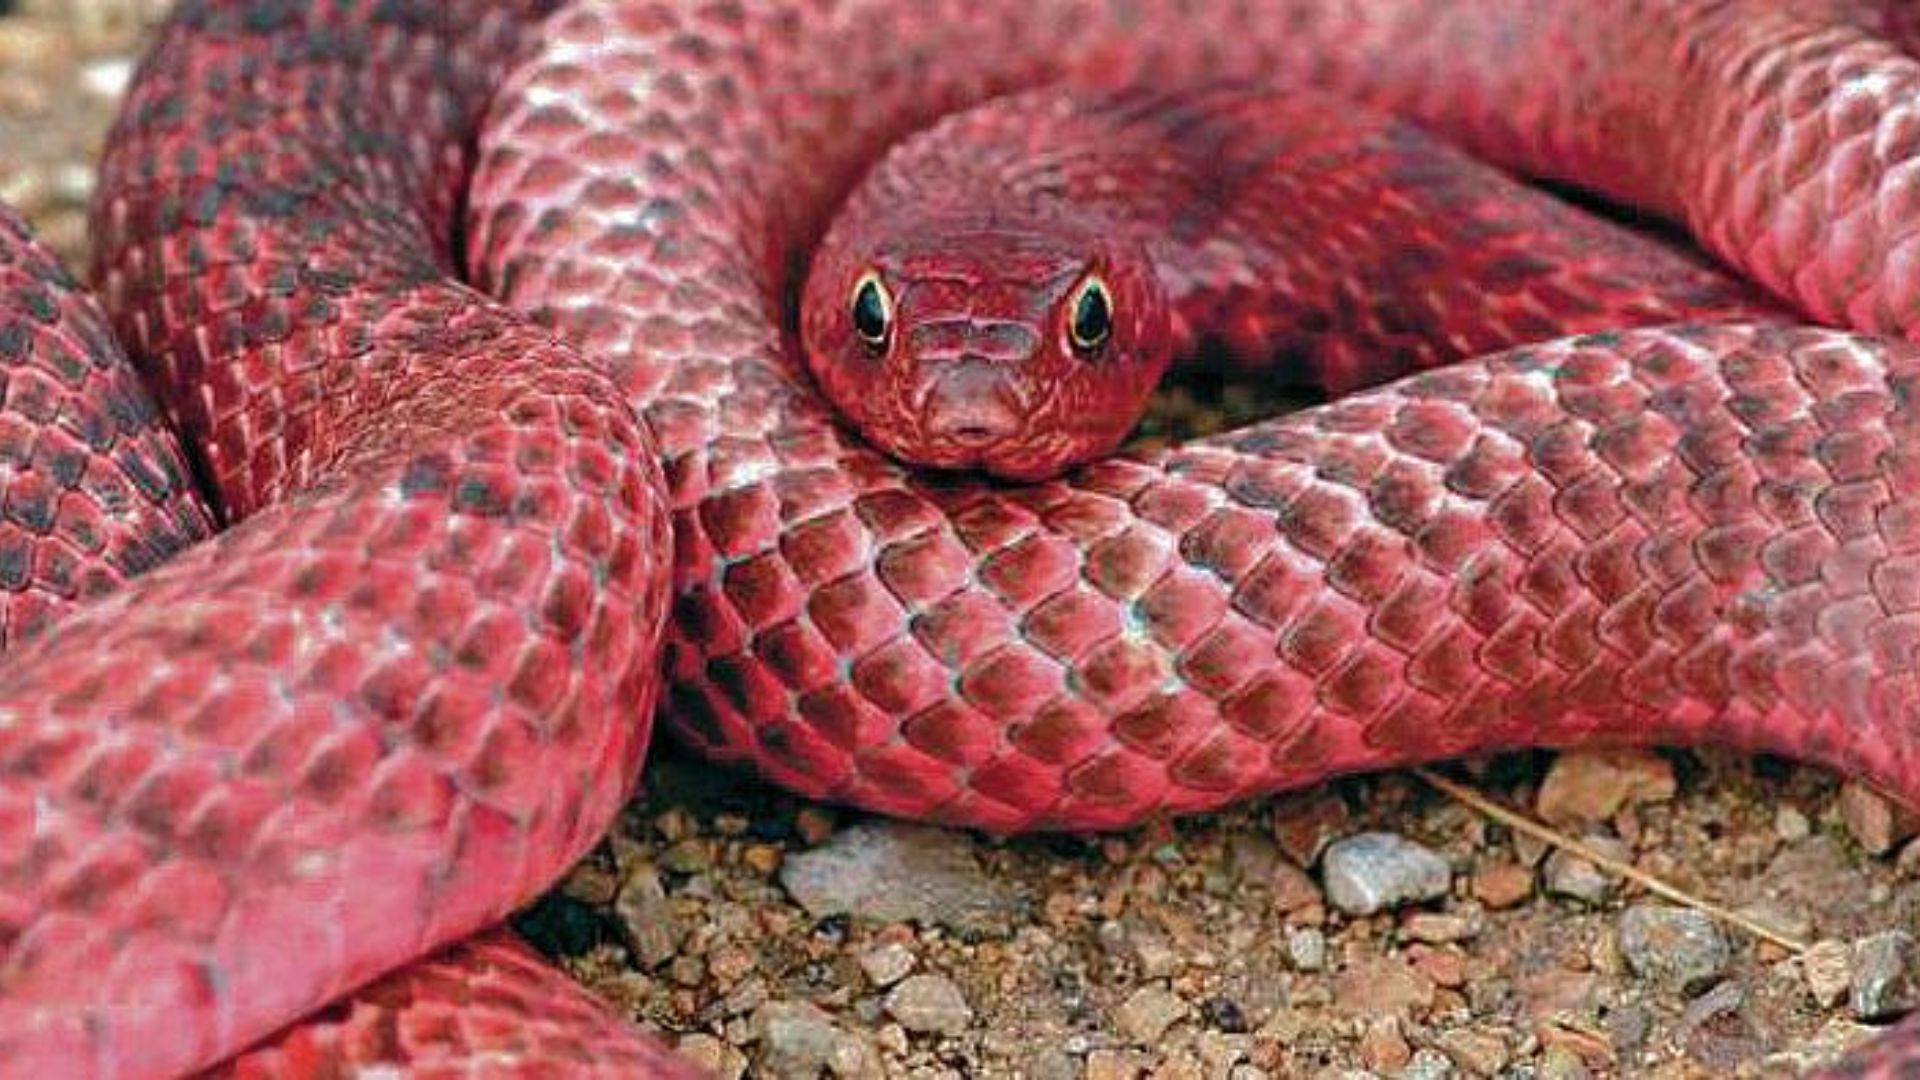 A red snake chilling in the ground